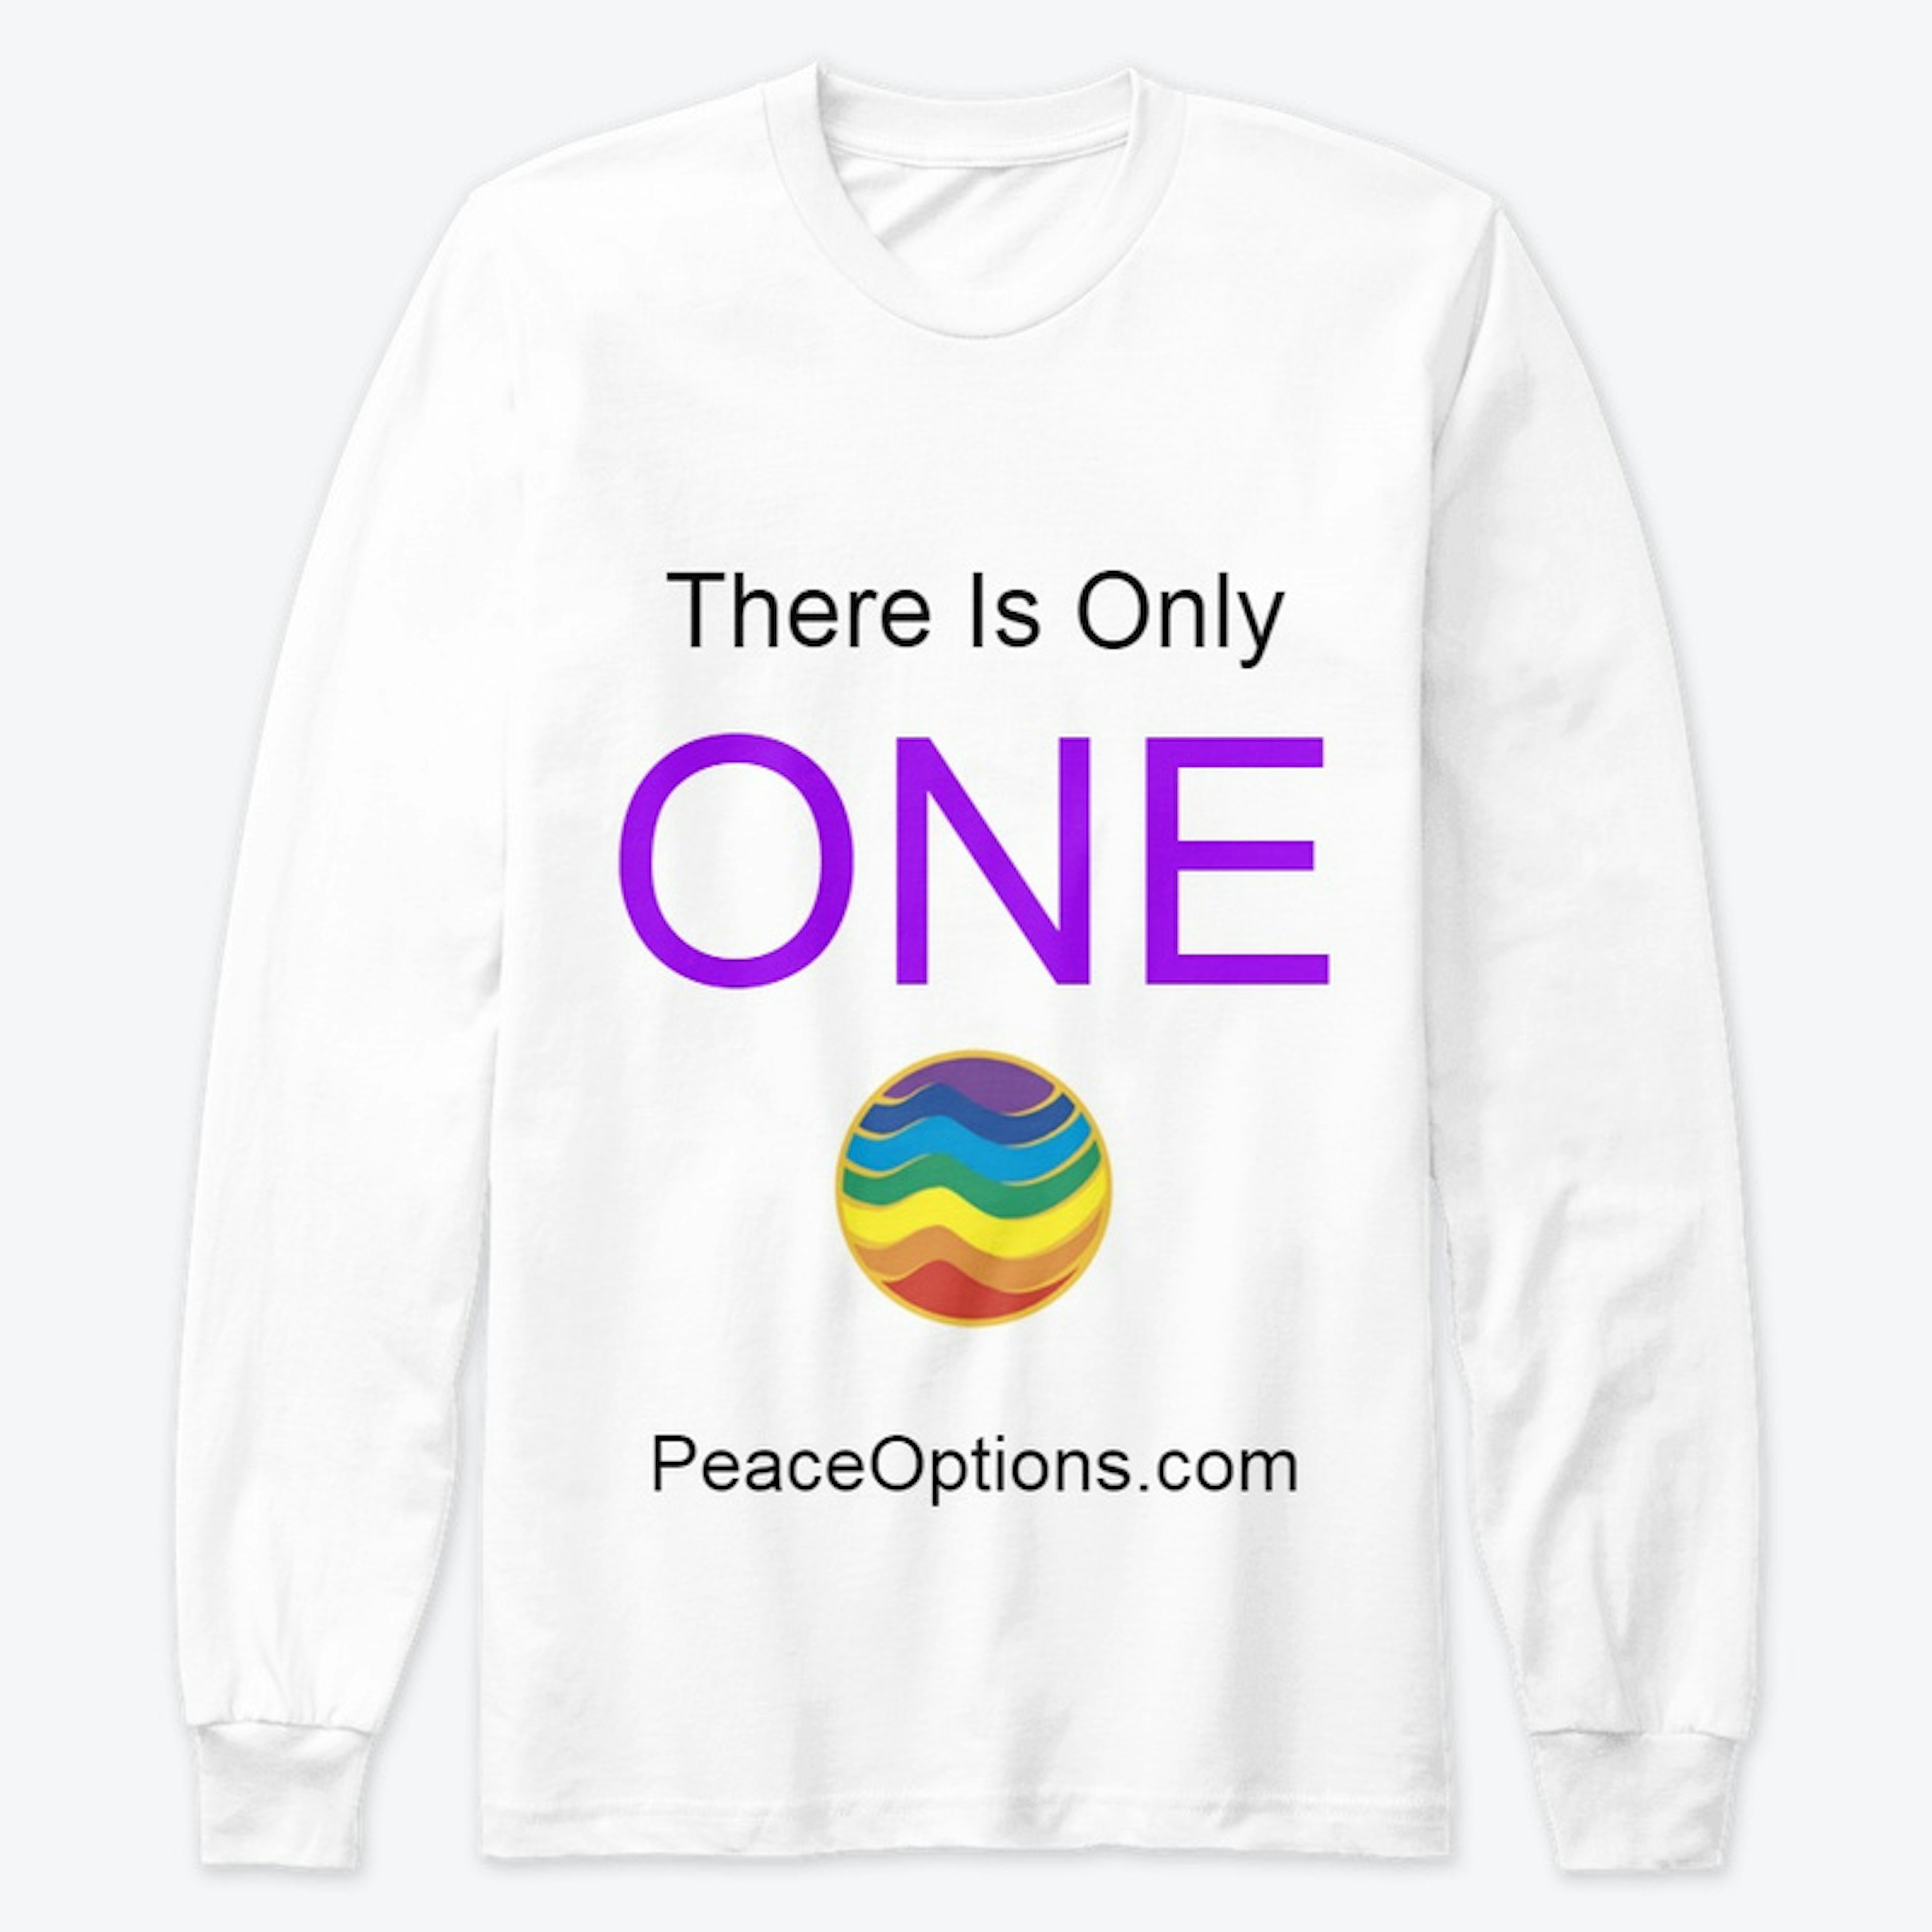 Only ONE Tee